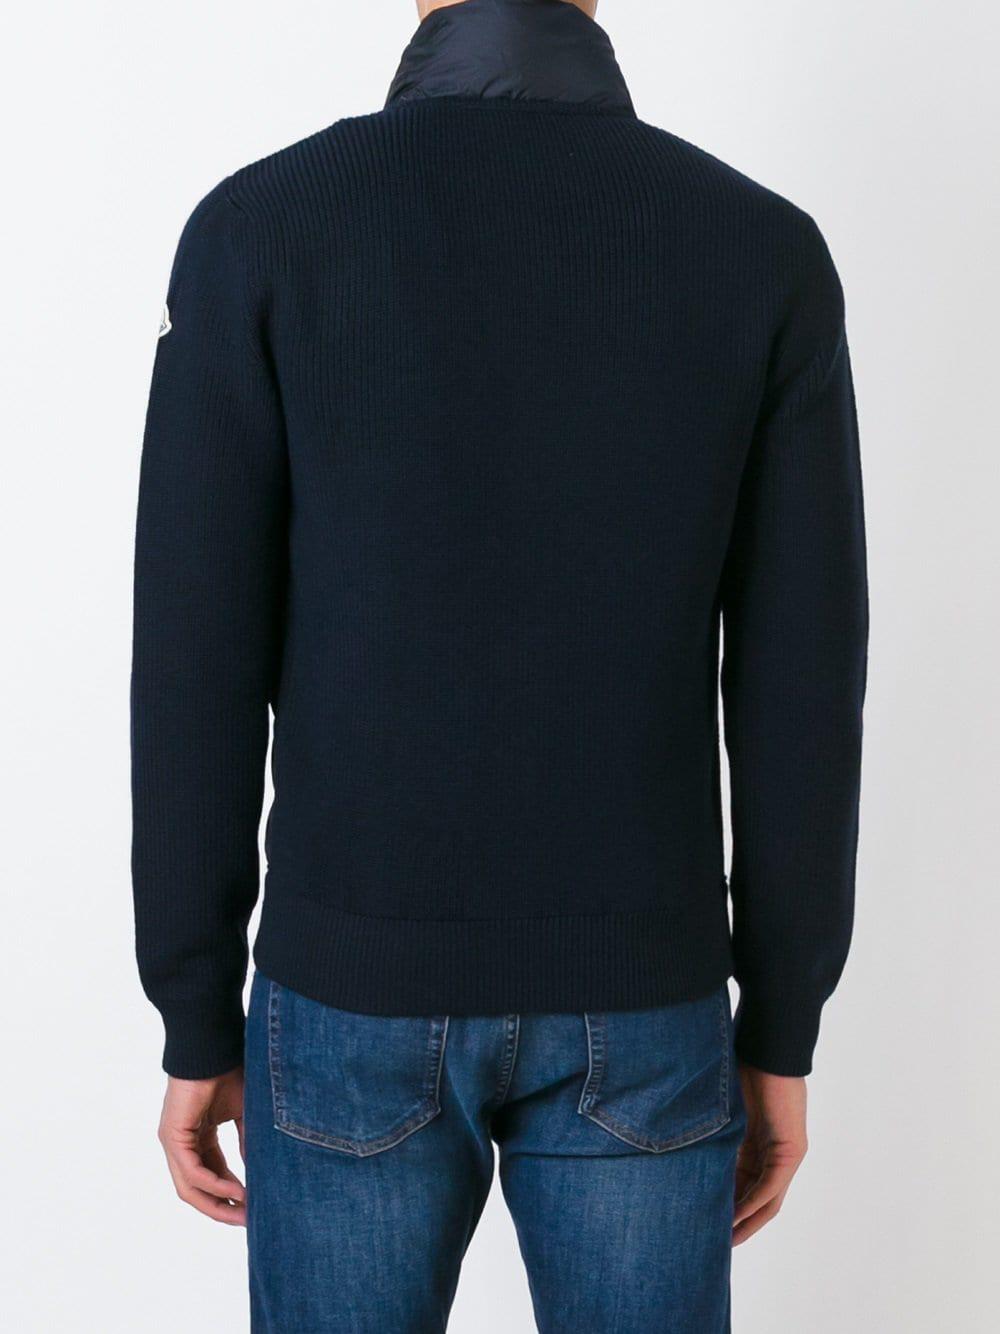 Moncler Wool Maglione Tricot Cardigan in Blue for Men | Lyst